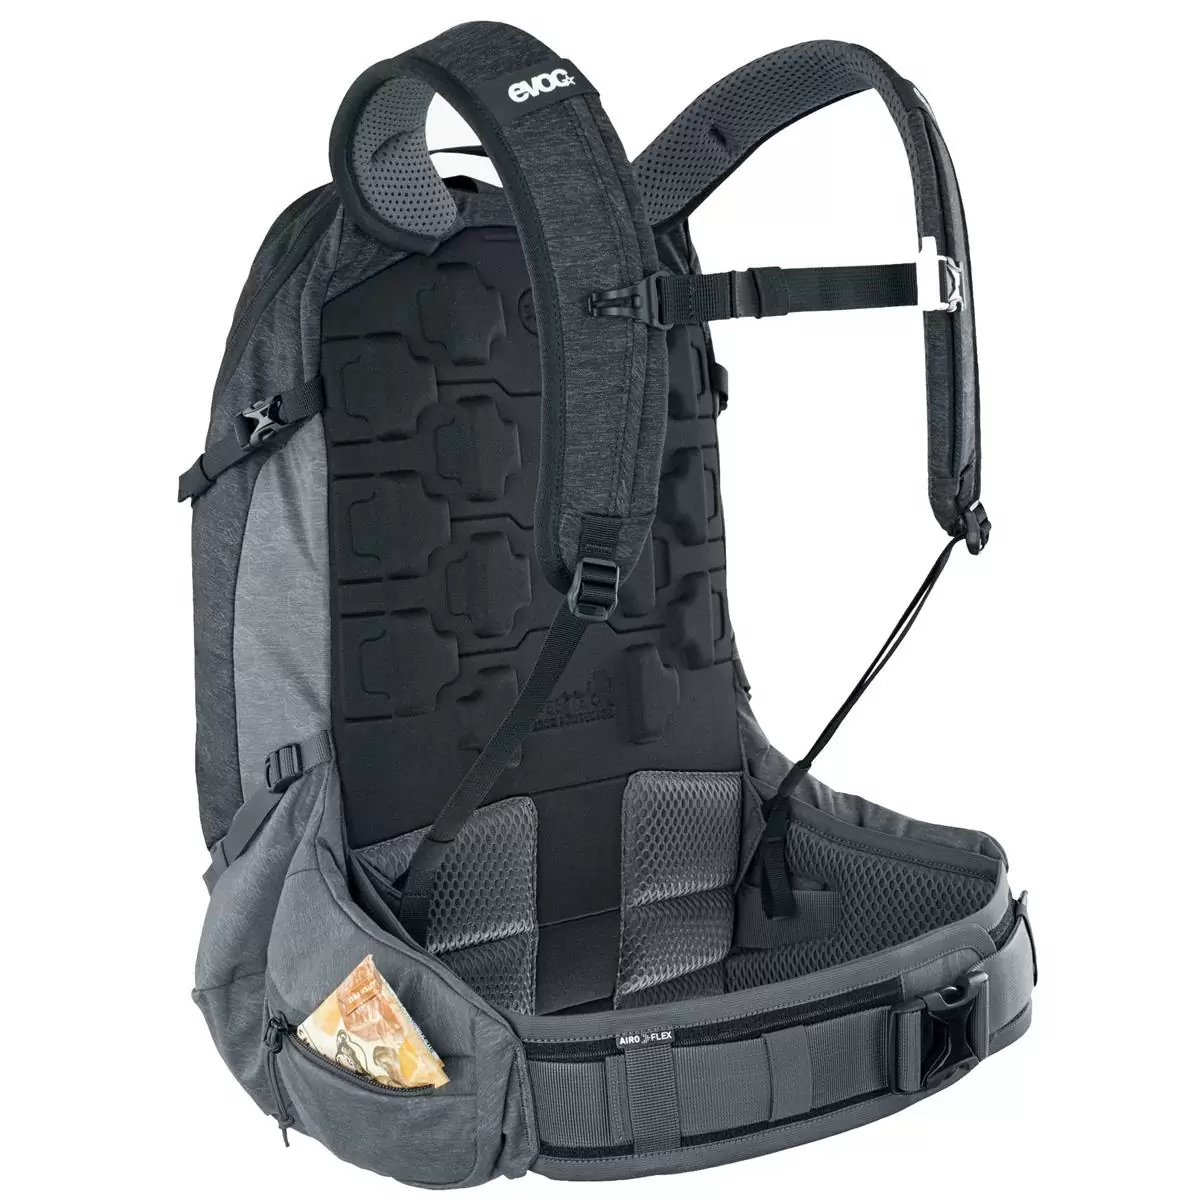 Trail Pro 26 liter backpack black - carbon gray with back protector size L/XL #2